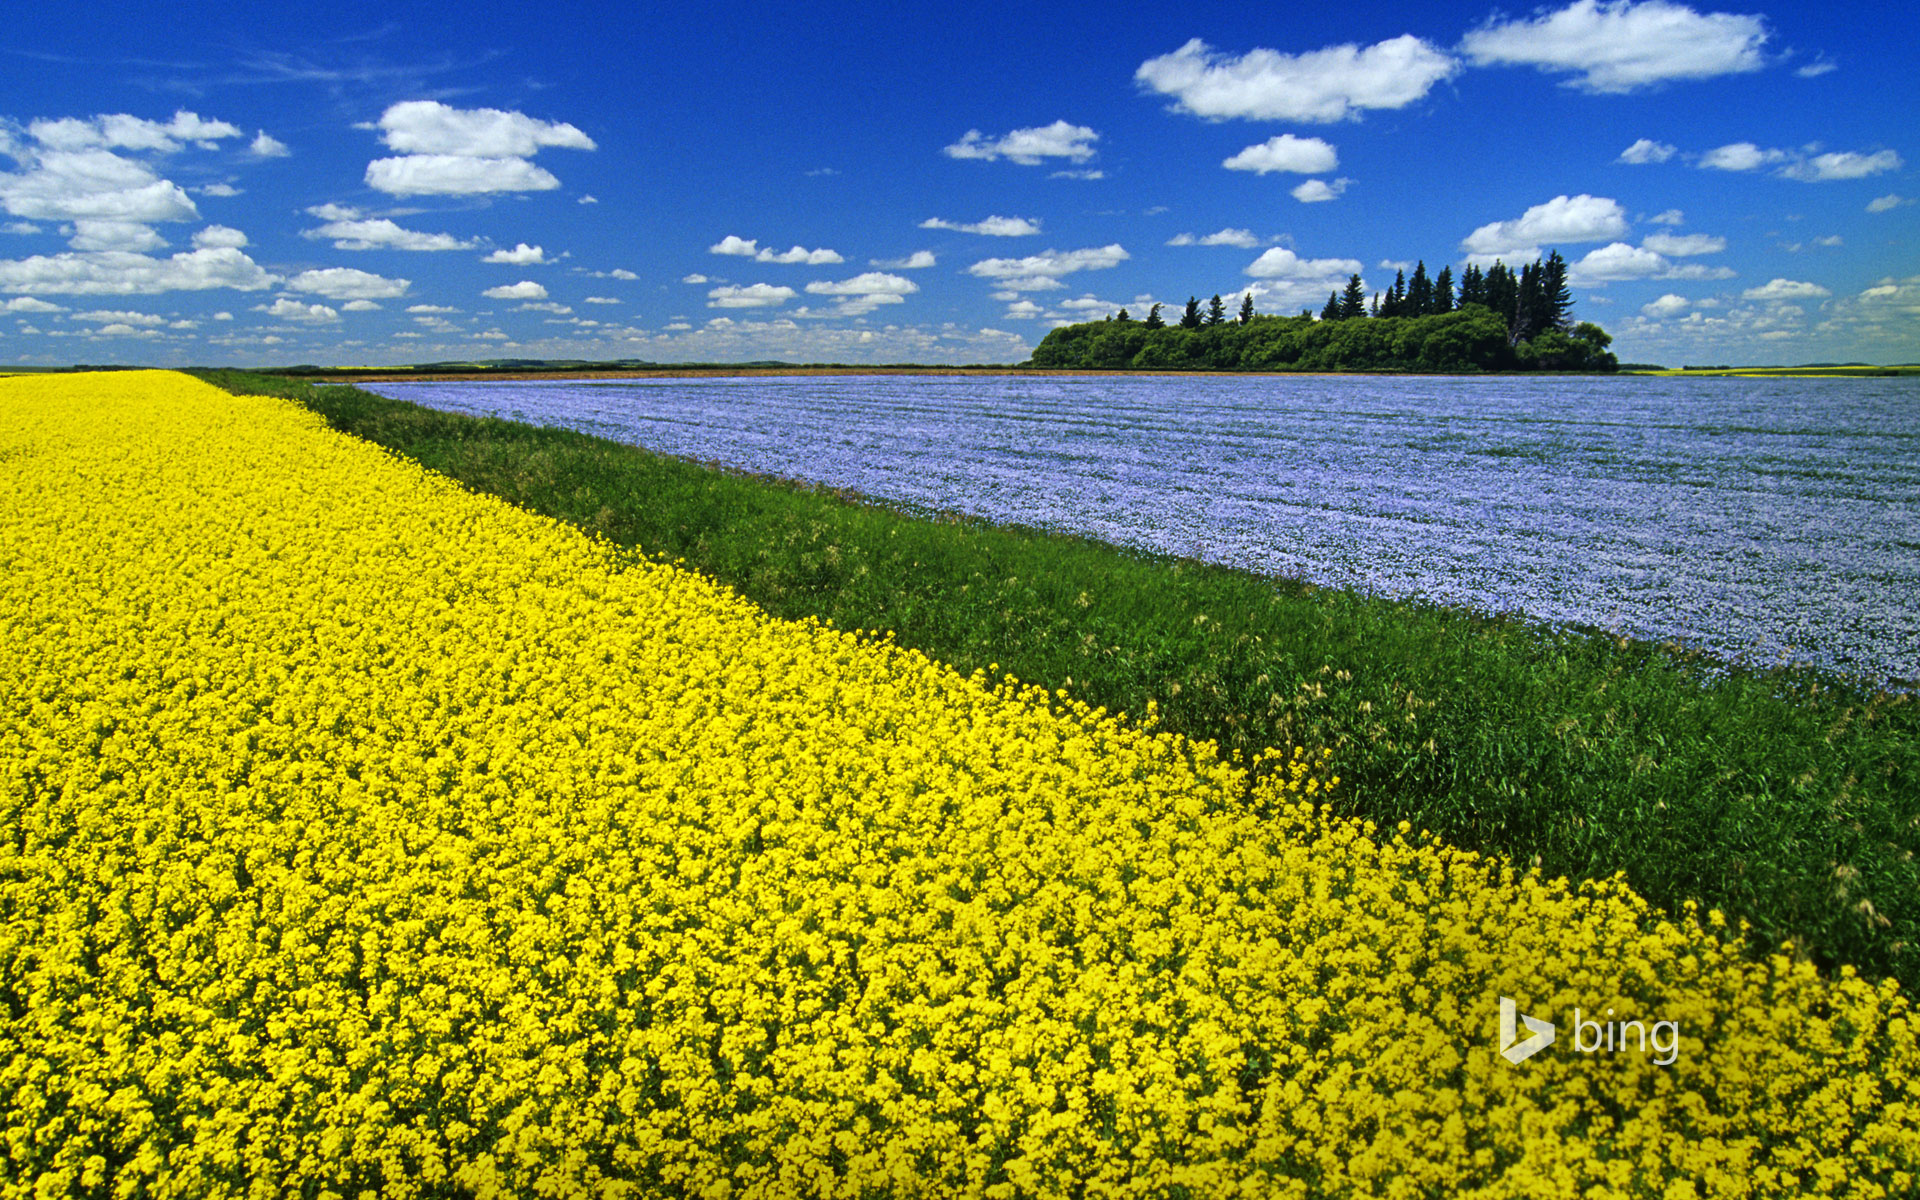 Flowering canola field with flax in the background and a sky filled with cumulus clouds, Tiger Hills near Somerset, Manitoba